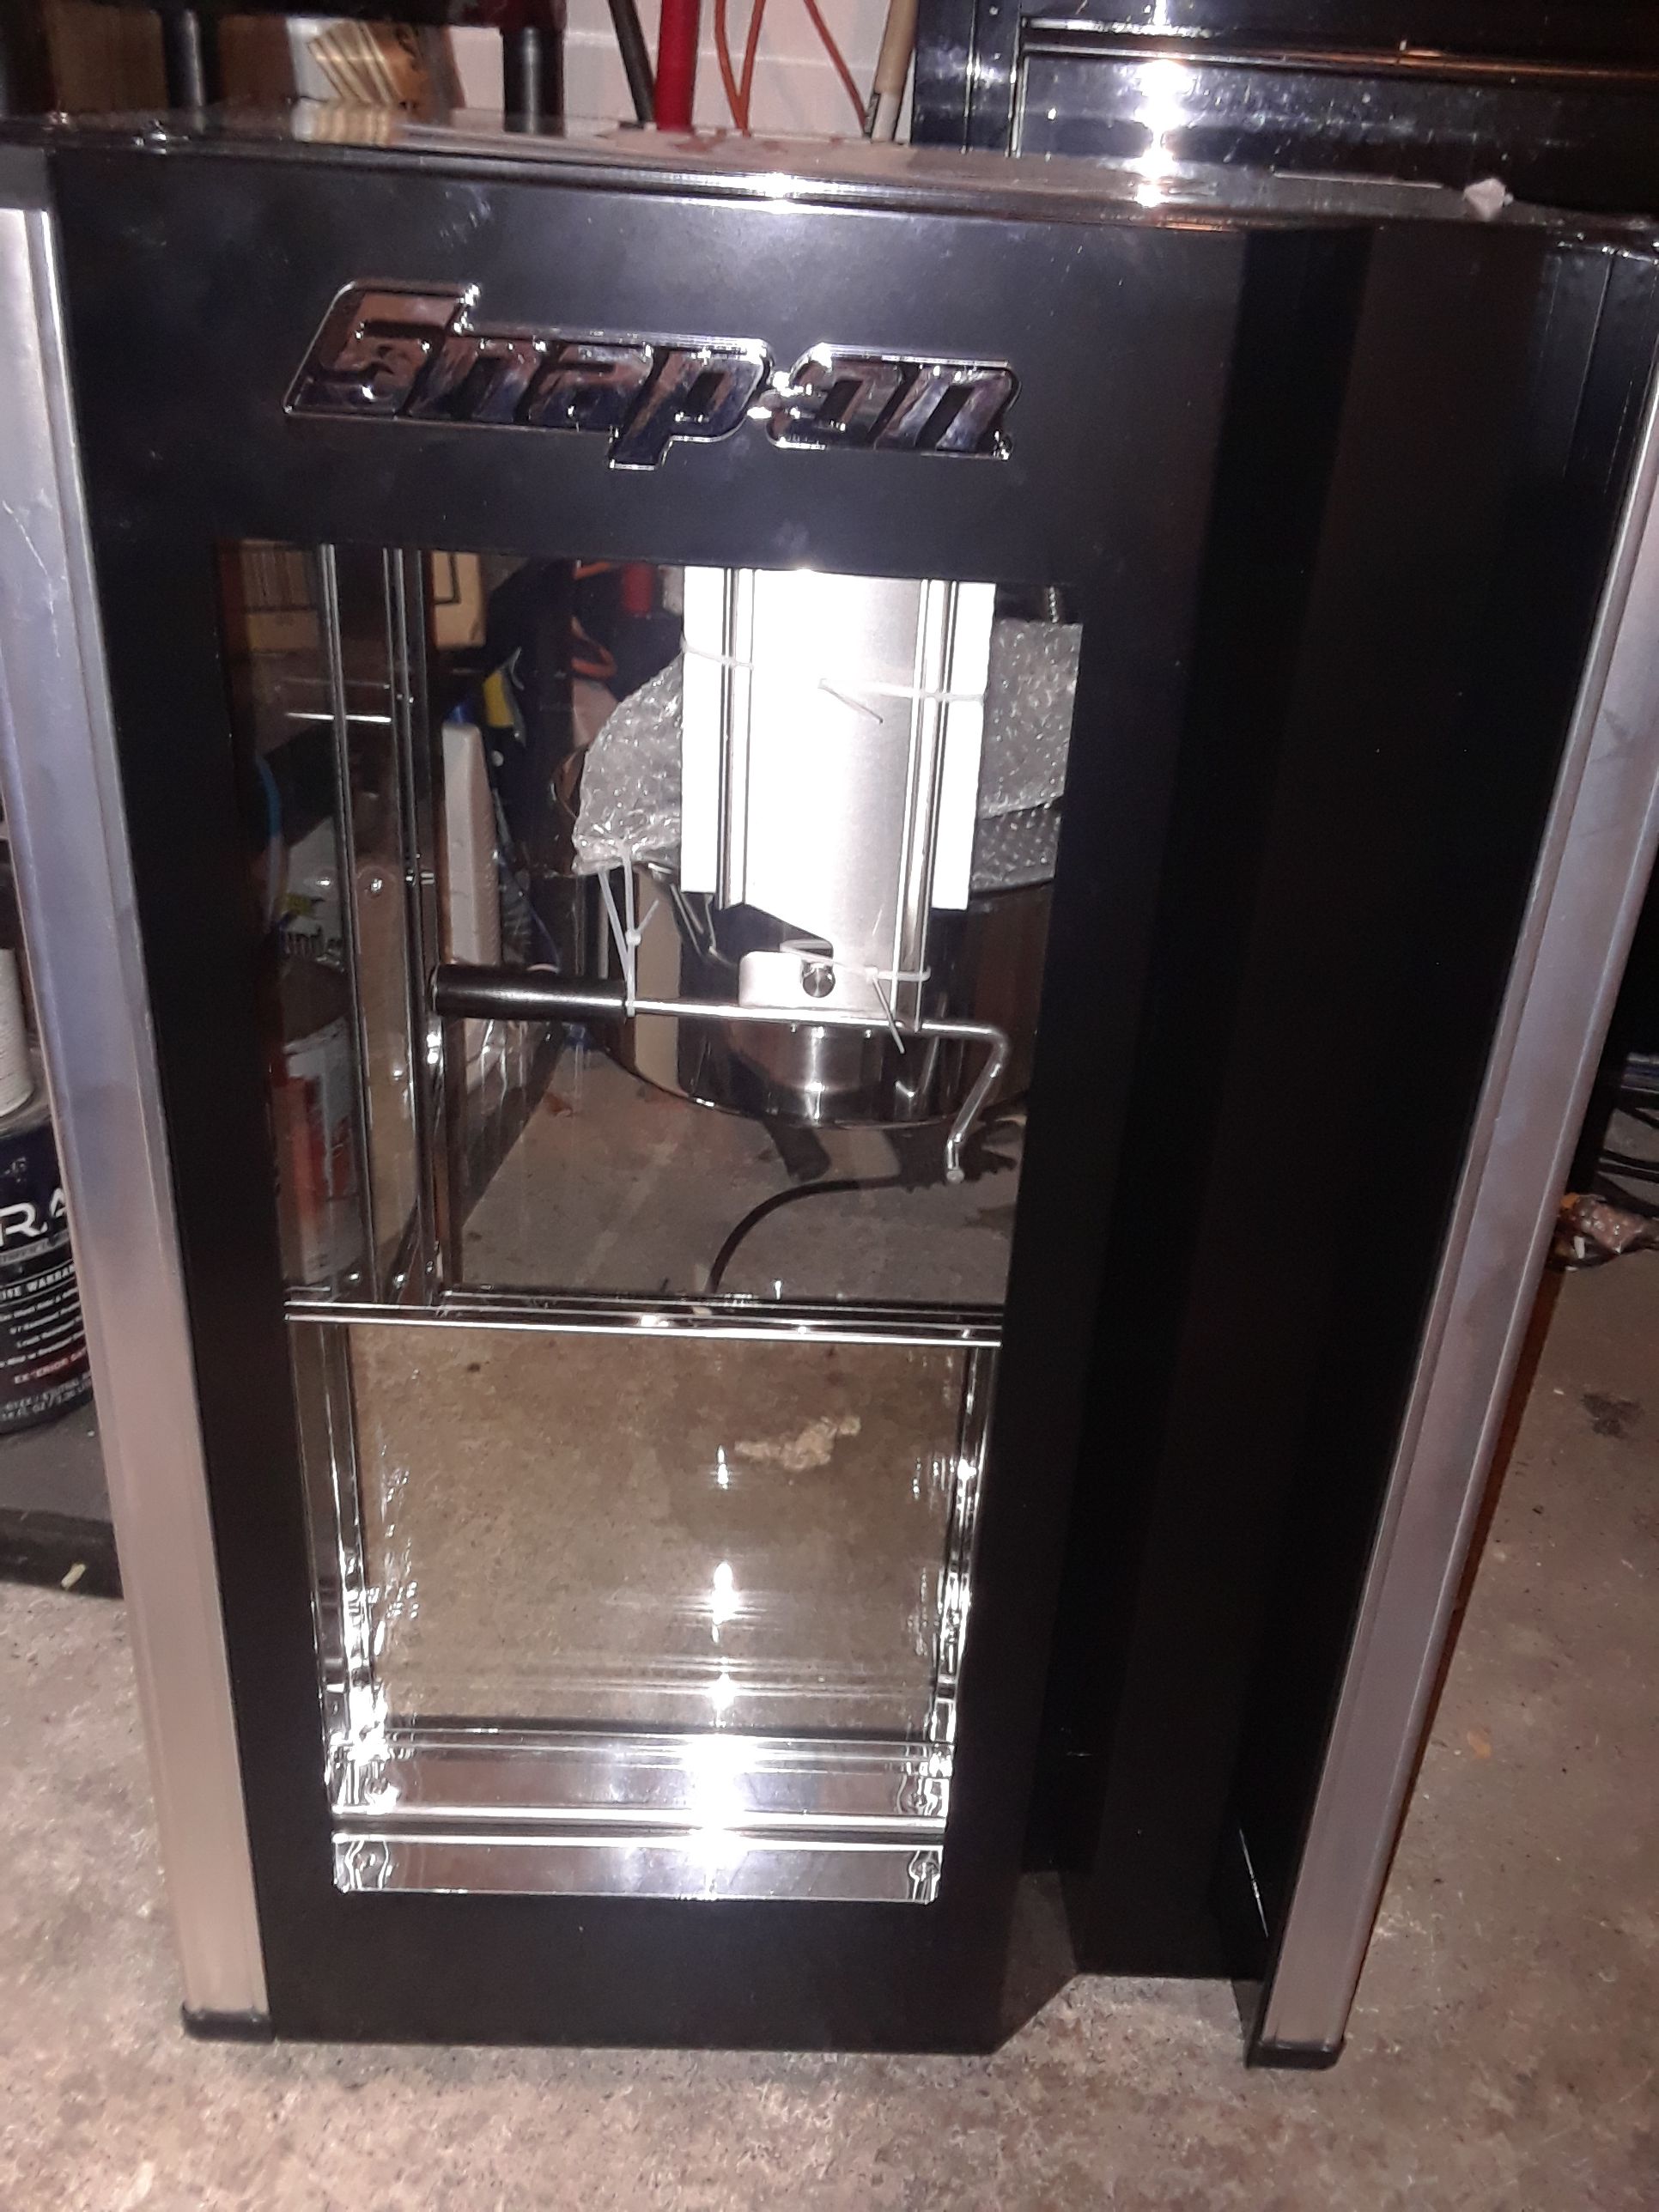 Cuisinart popcorn machine for Sale in Prospect Heights, IL - OfferUp